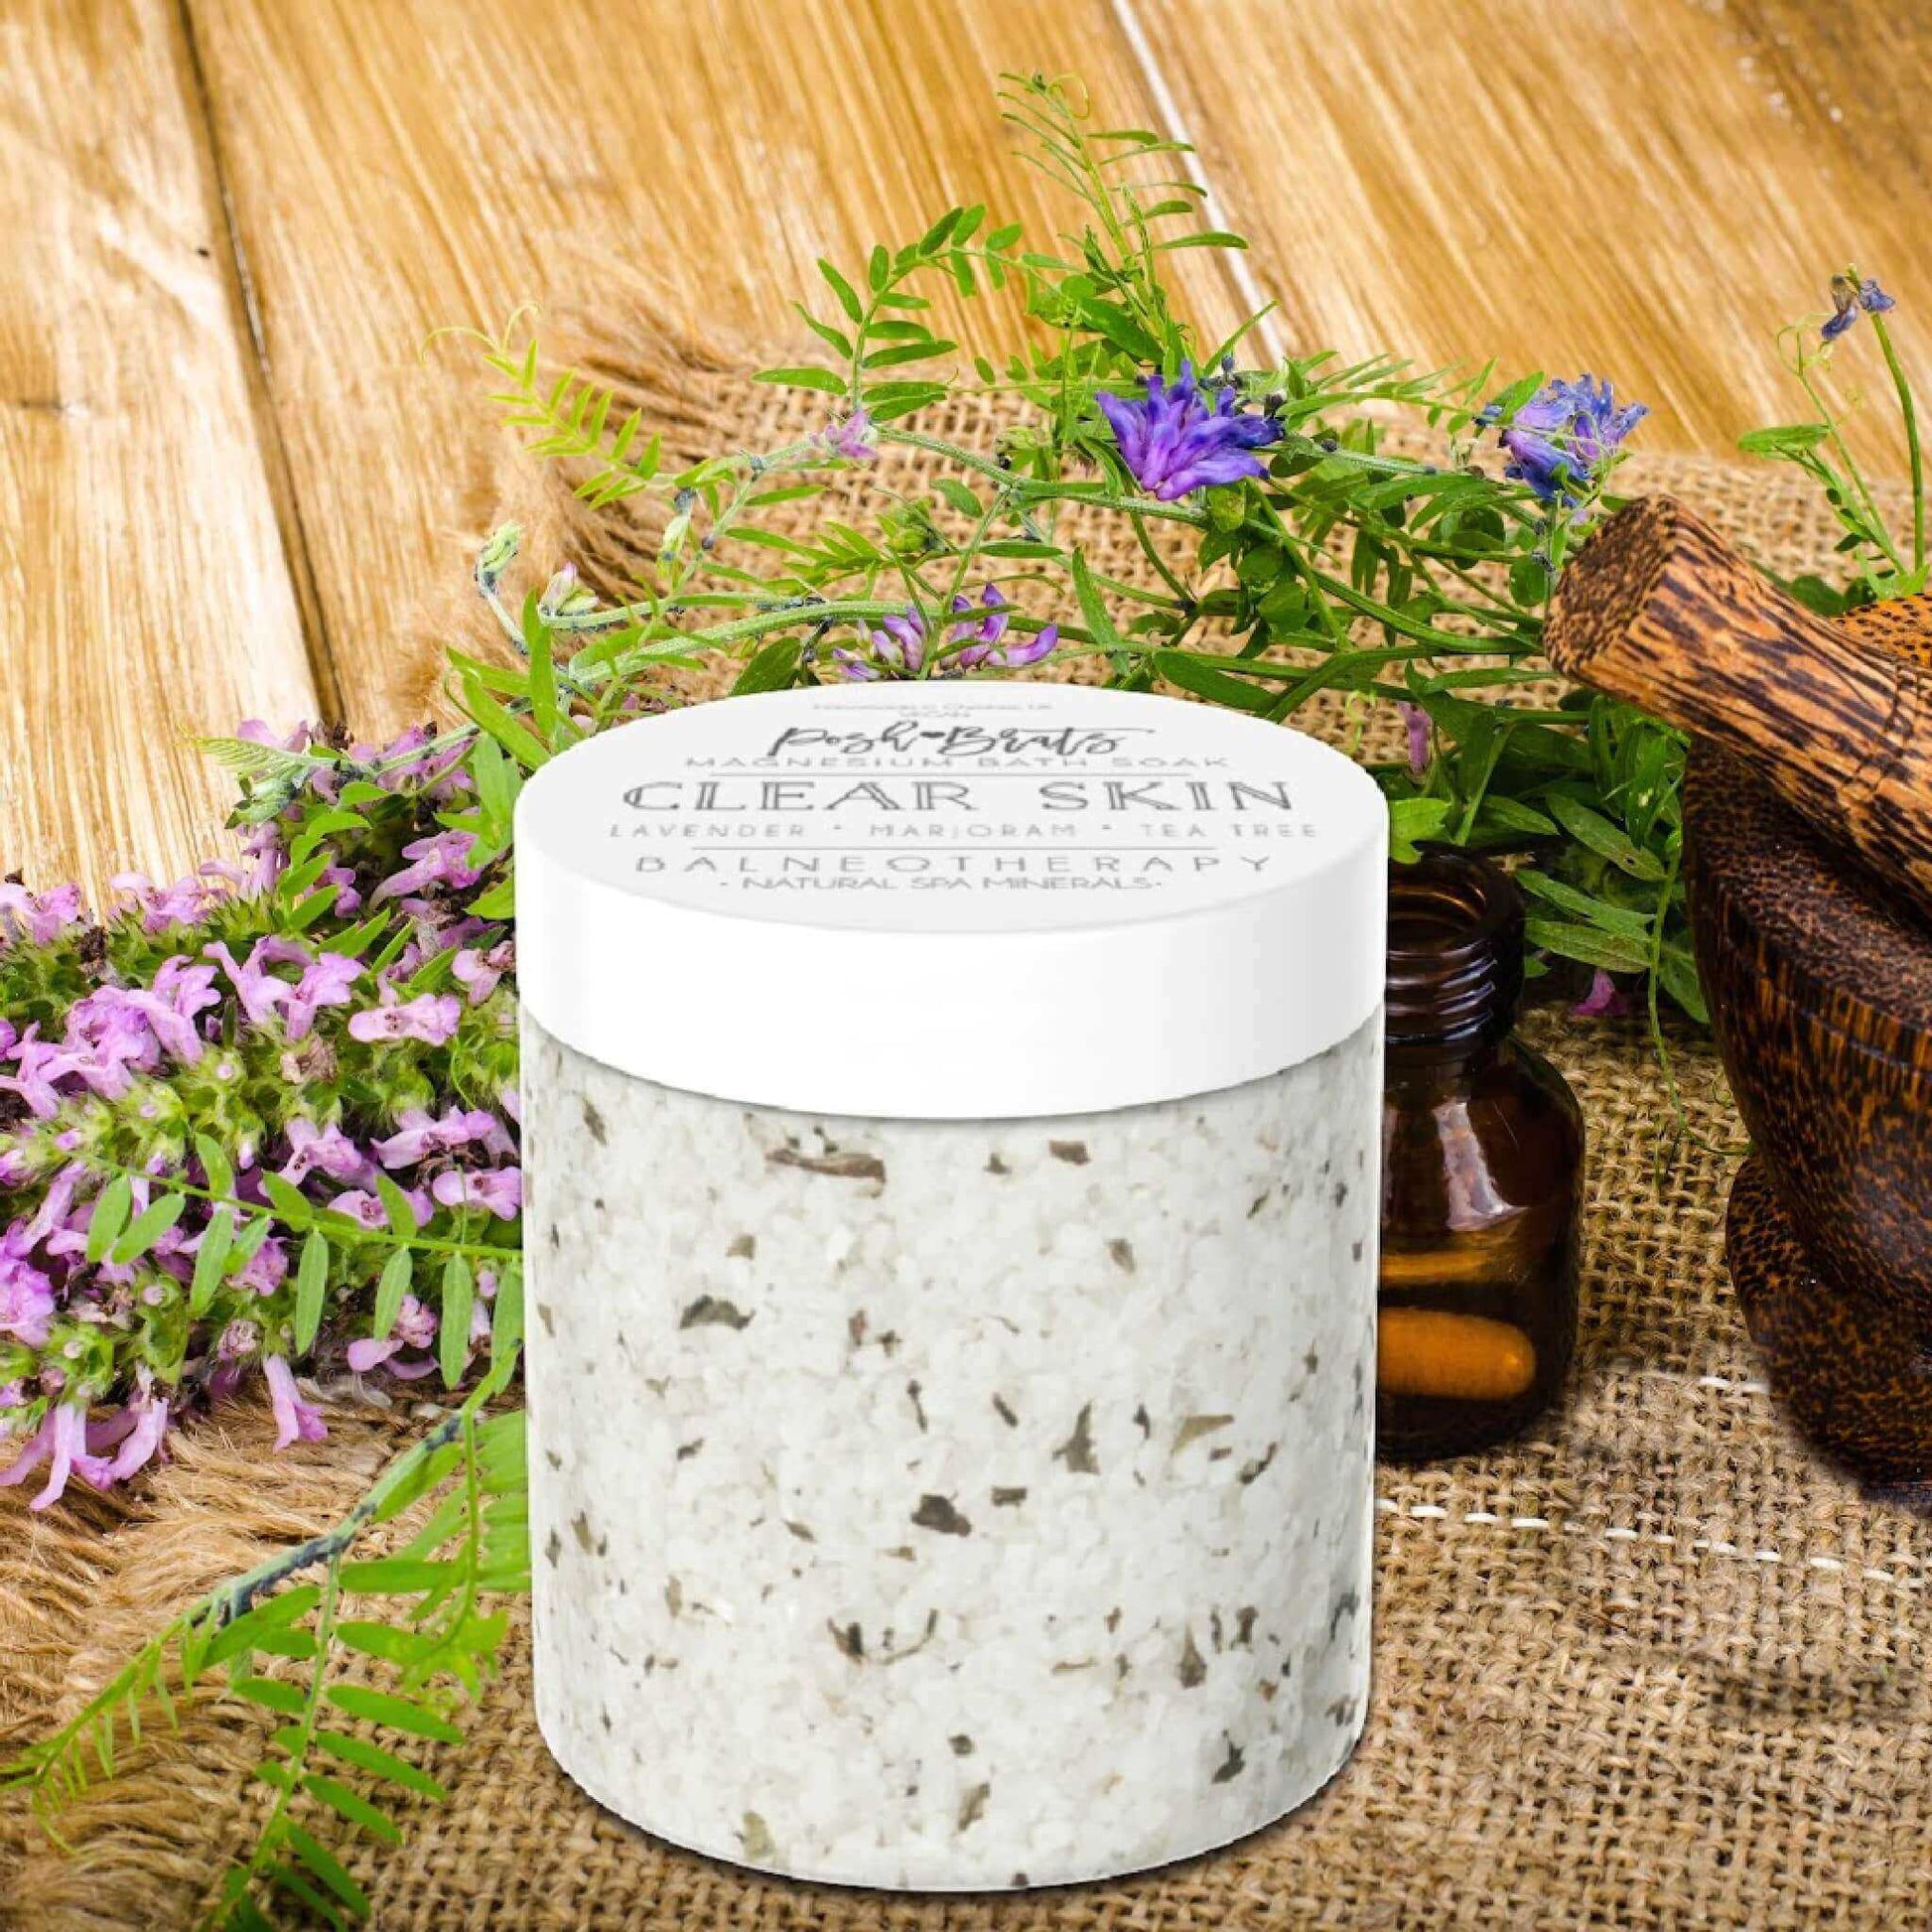 Clear Skin Bath Salt - Dive into an aromatic experience with our Magnesium Aromatherapy Soak, for a healthier glow.